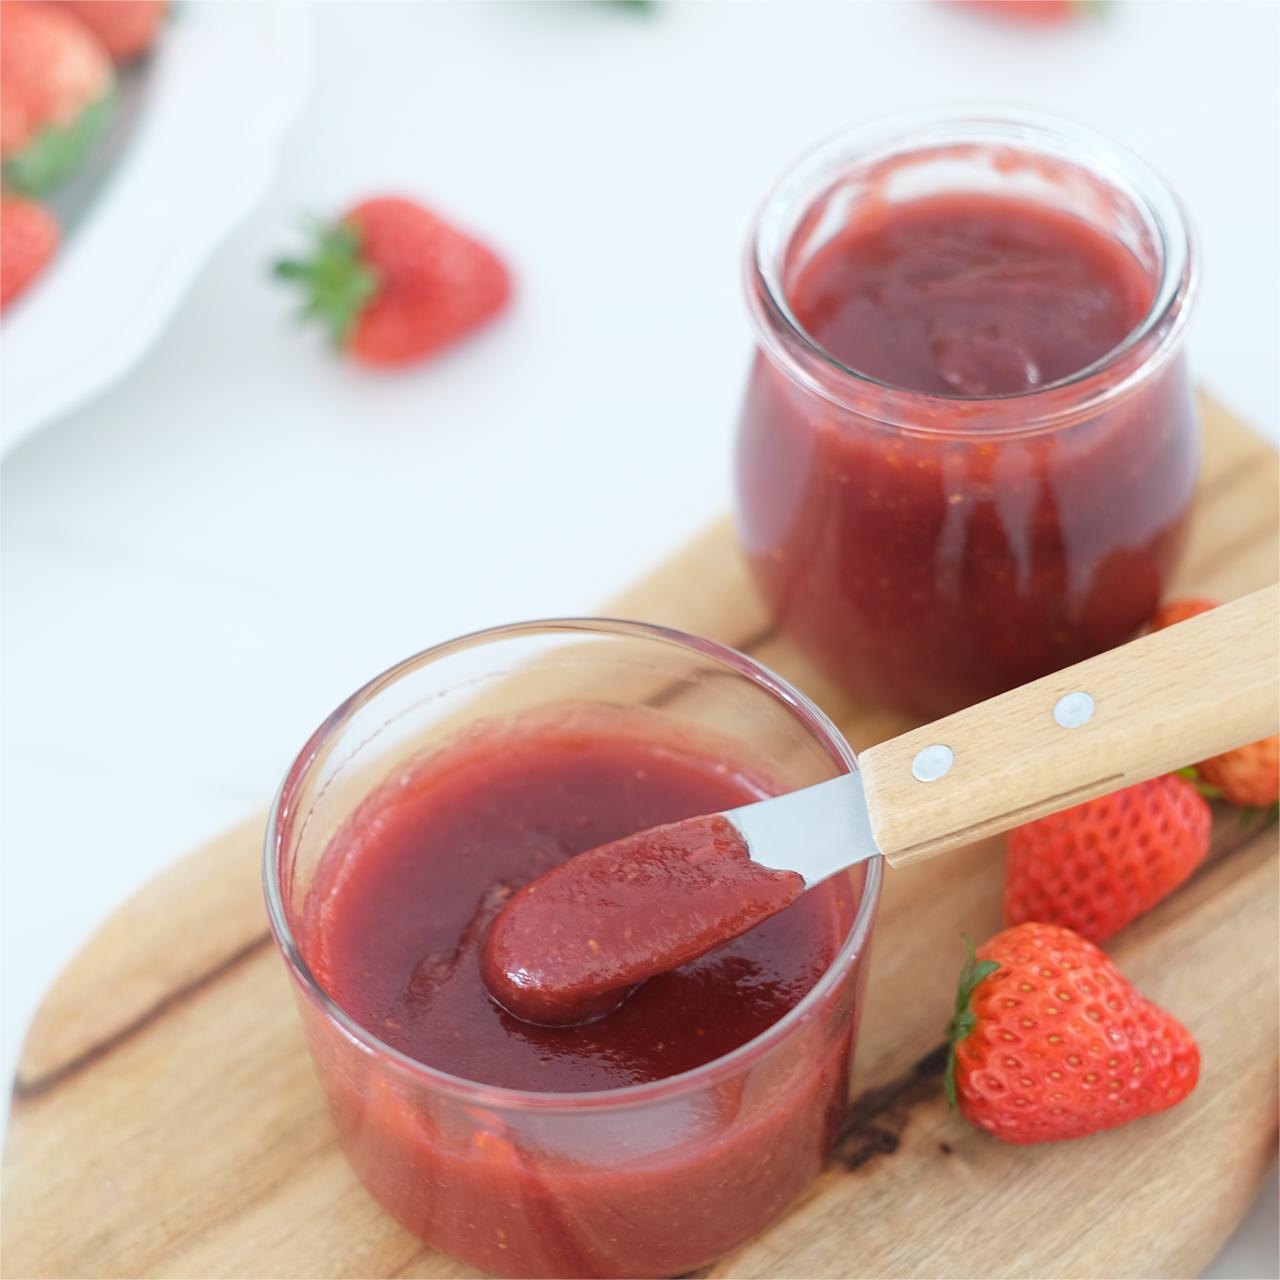 How To Make Delicious Strawberry Jam?